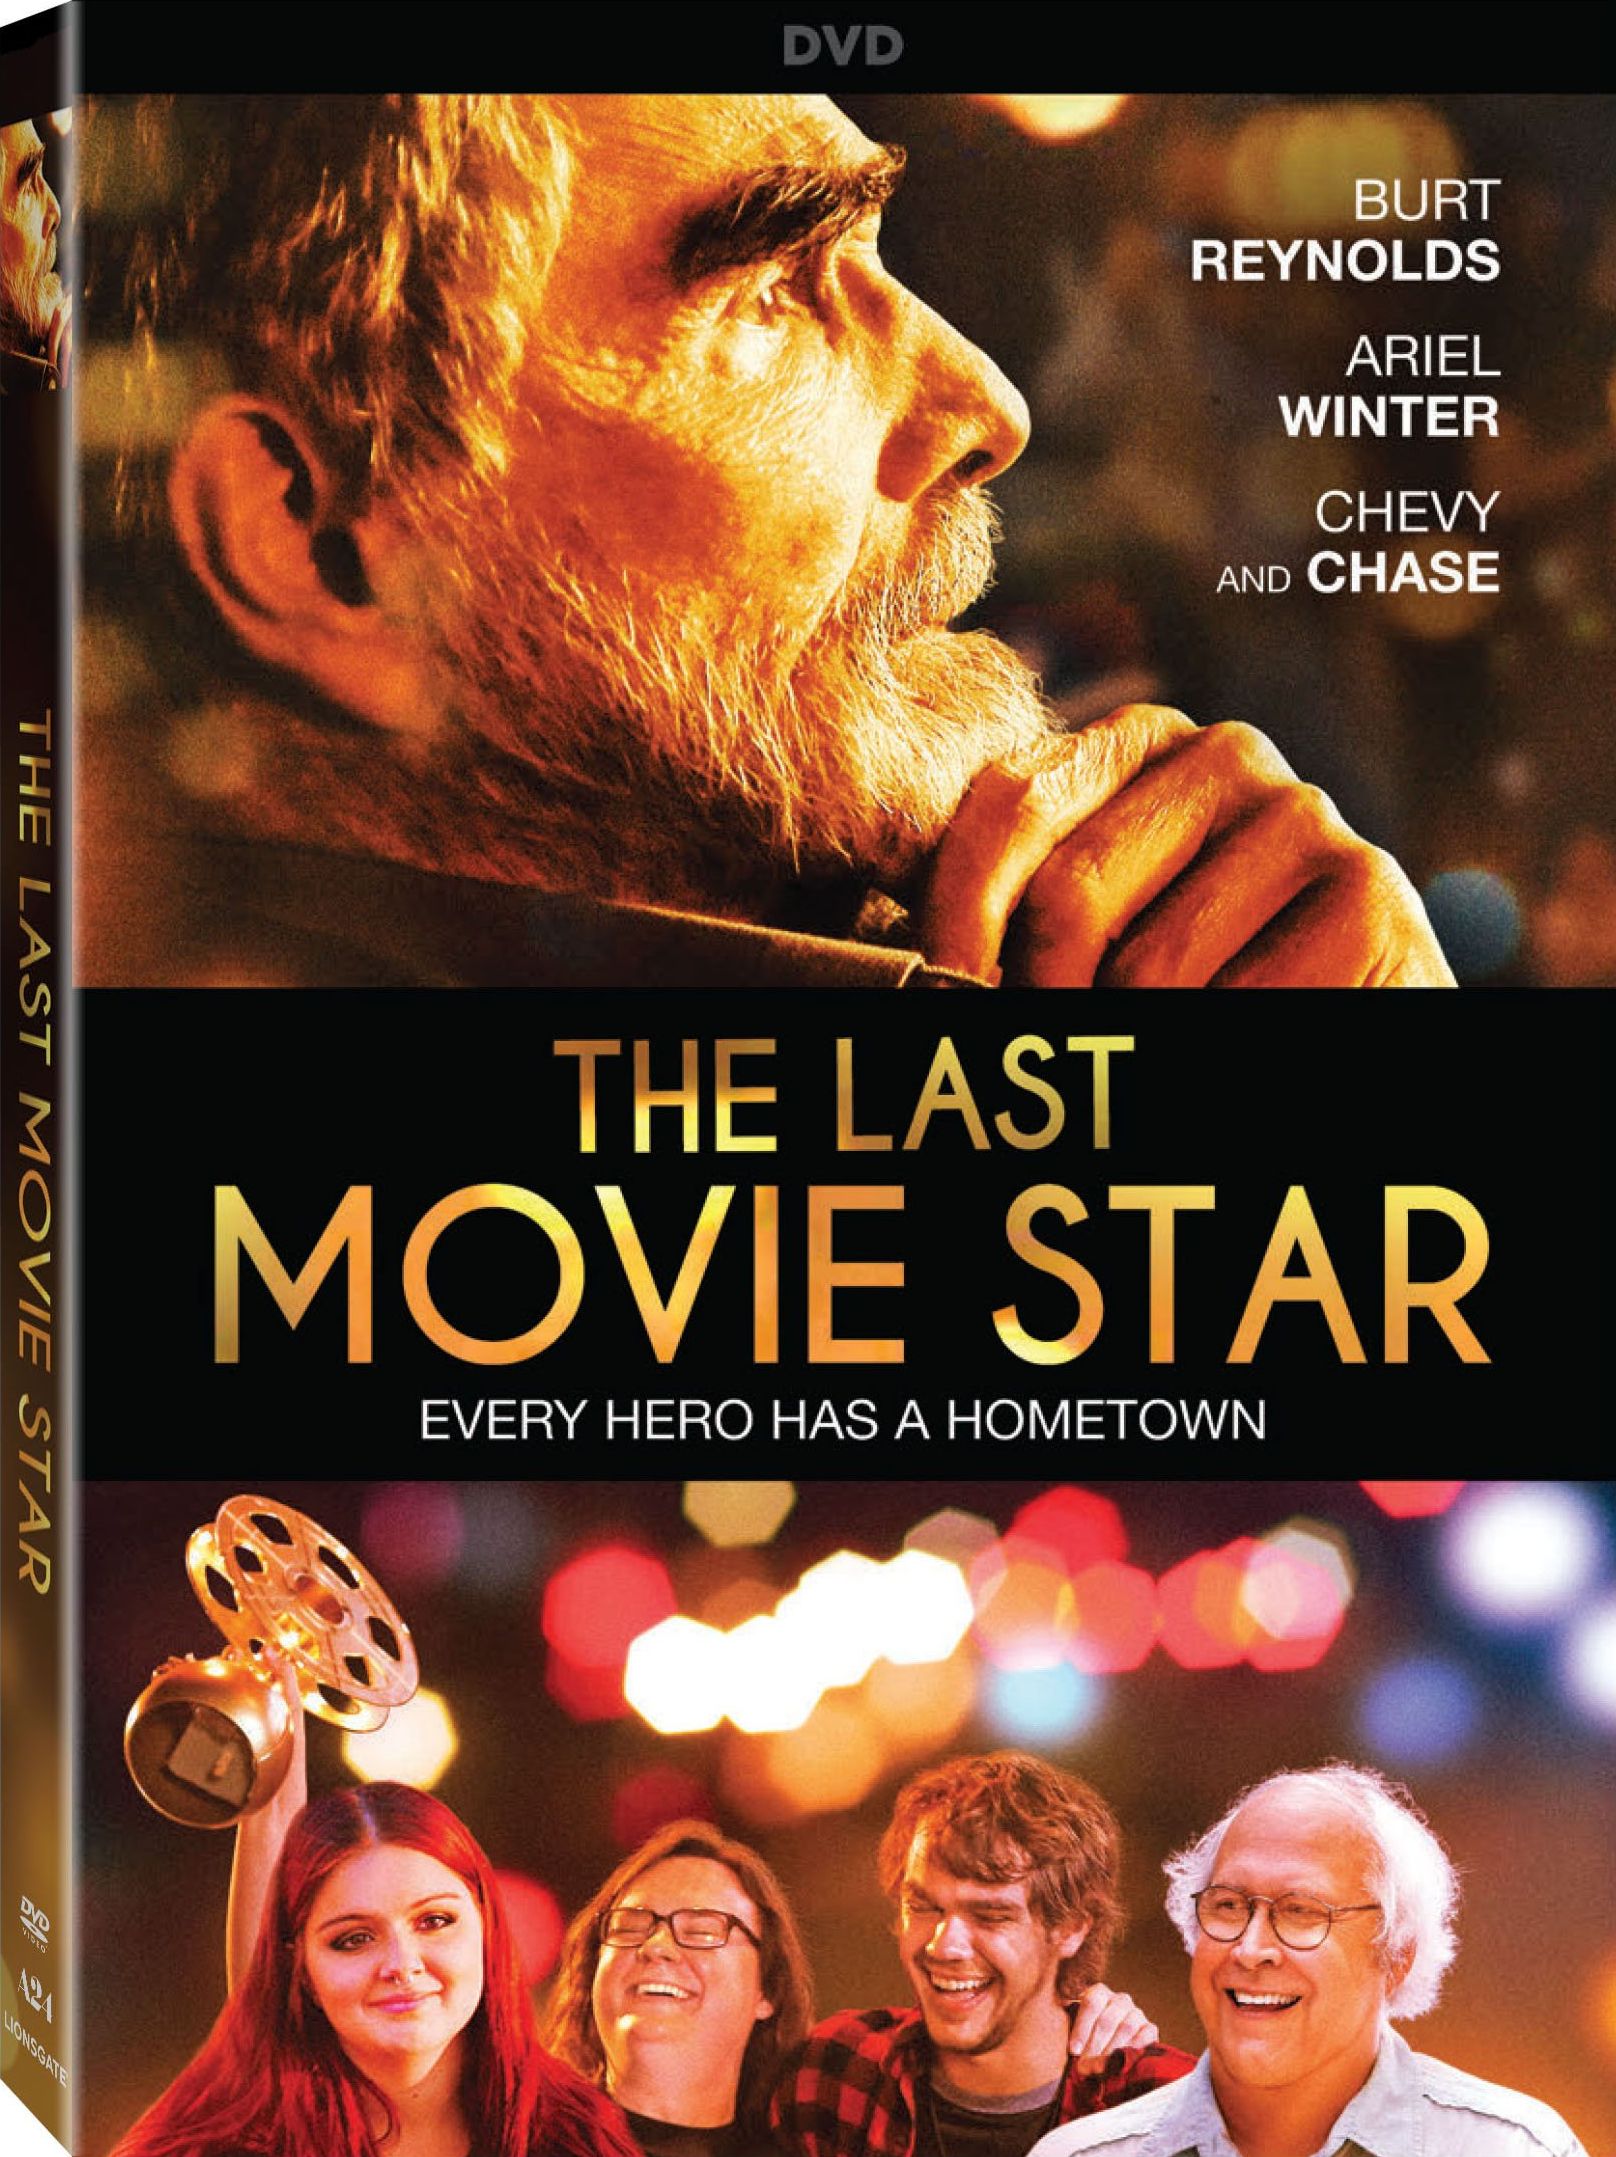 The Last Movie Star DVD Release Date March 27, 2018